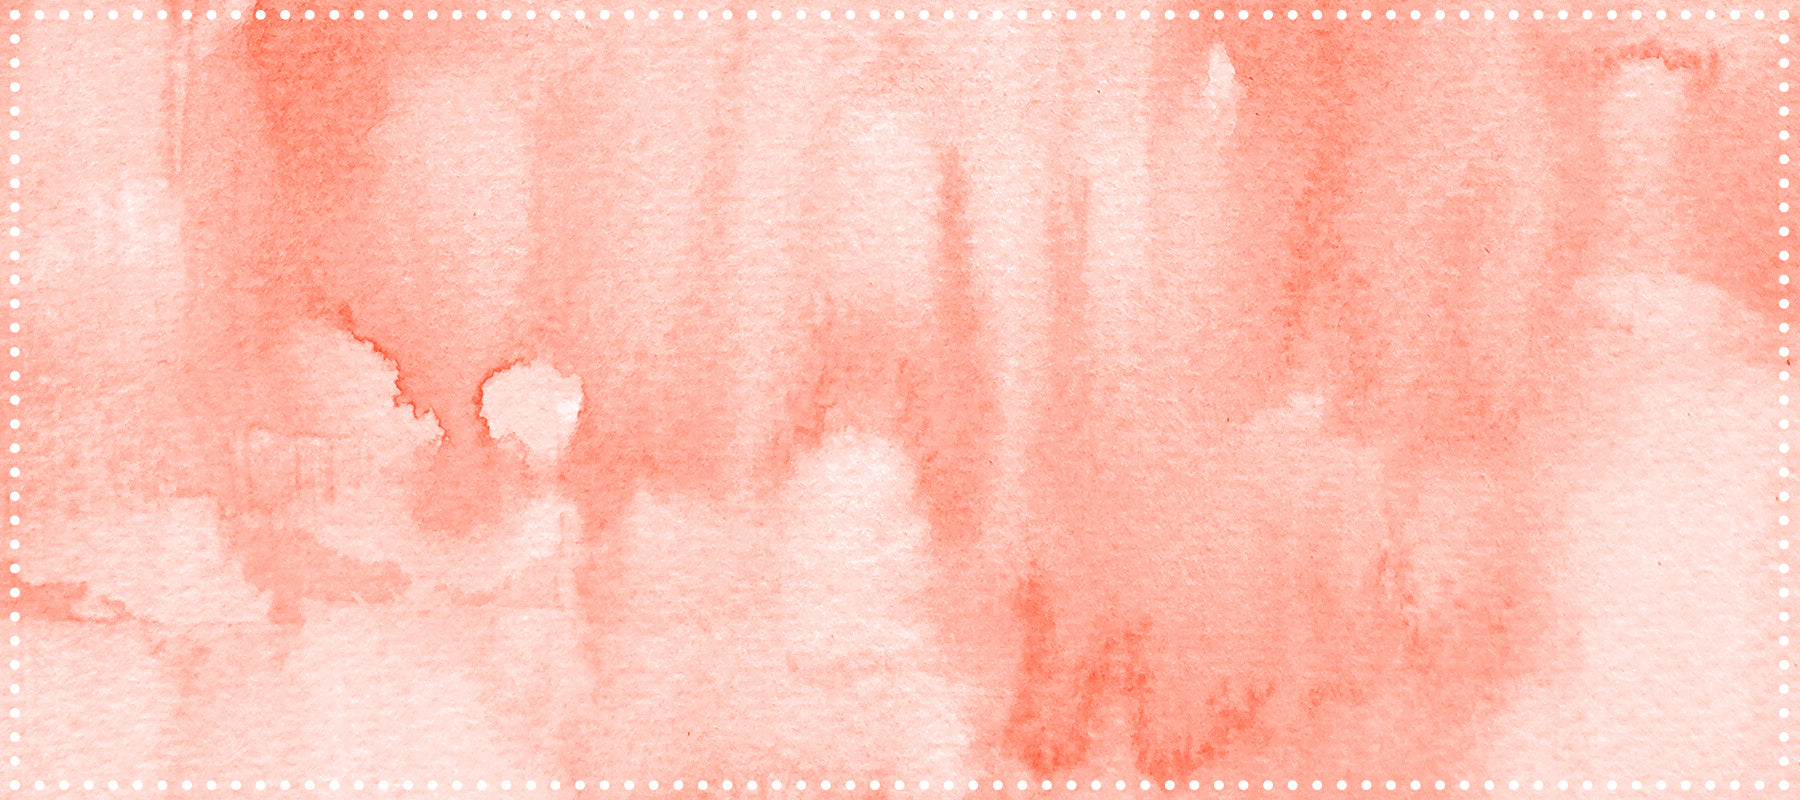 Abstract red watercolor background with a soft gradient and uneven color distribution, framed by a dotted border.